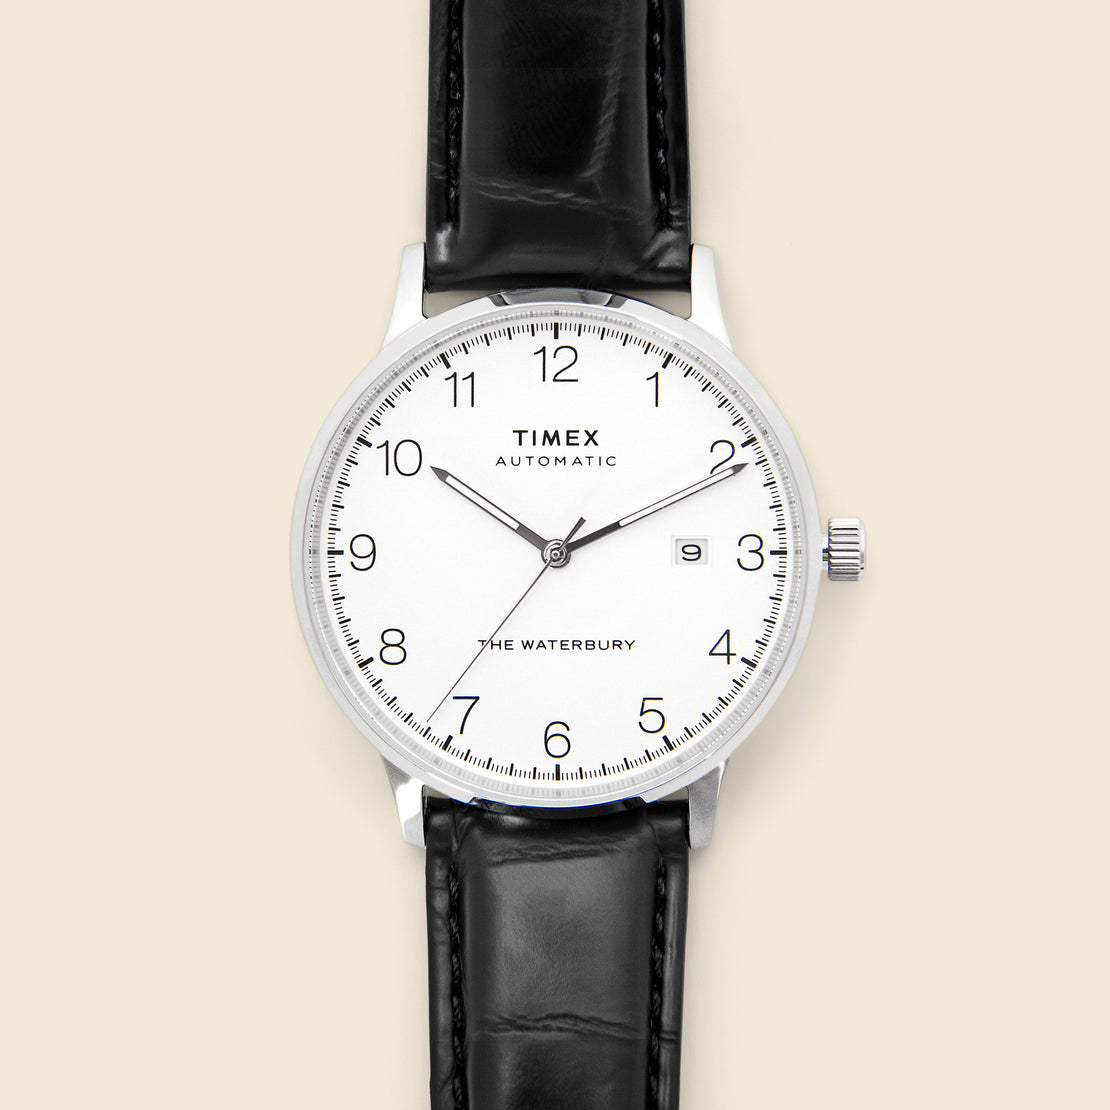 Timex Waterbury Leather Strap Watch 40mm - Stainless Steel/Black/White